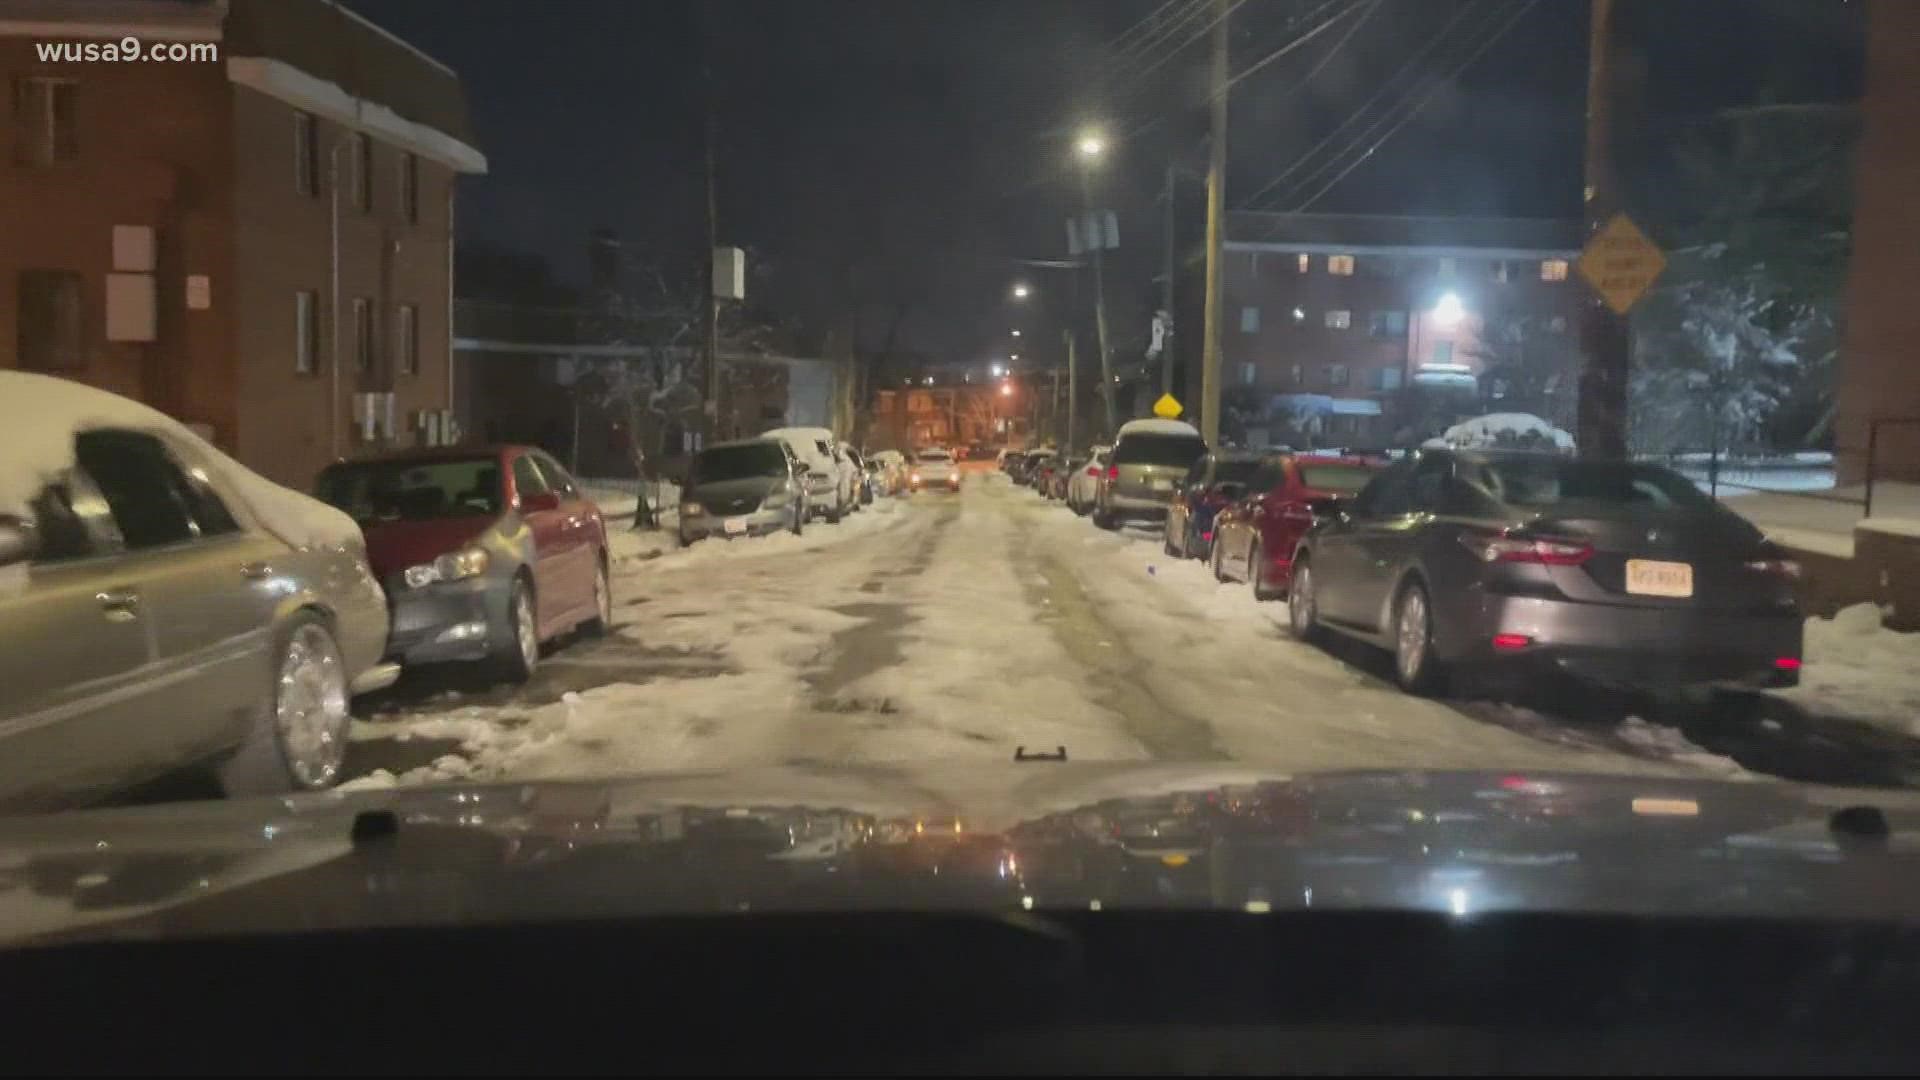 District leaders said it is usually their goal to have most residential side streets cleared within 36 hours of a snow storm.